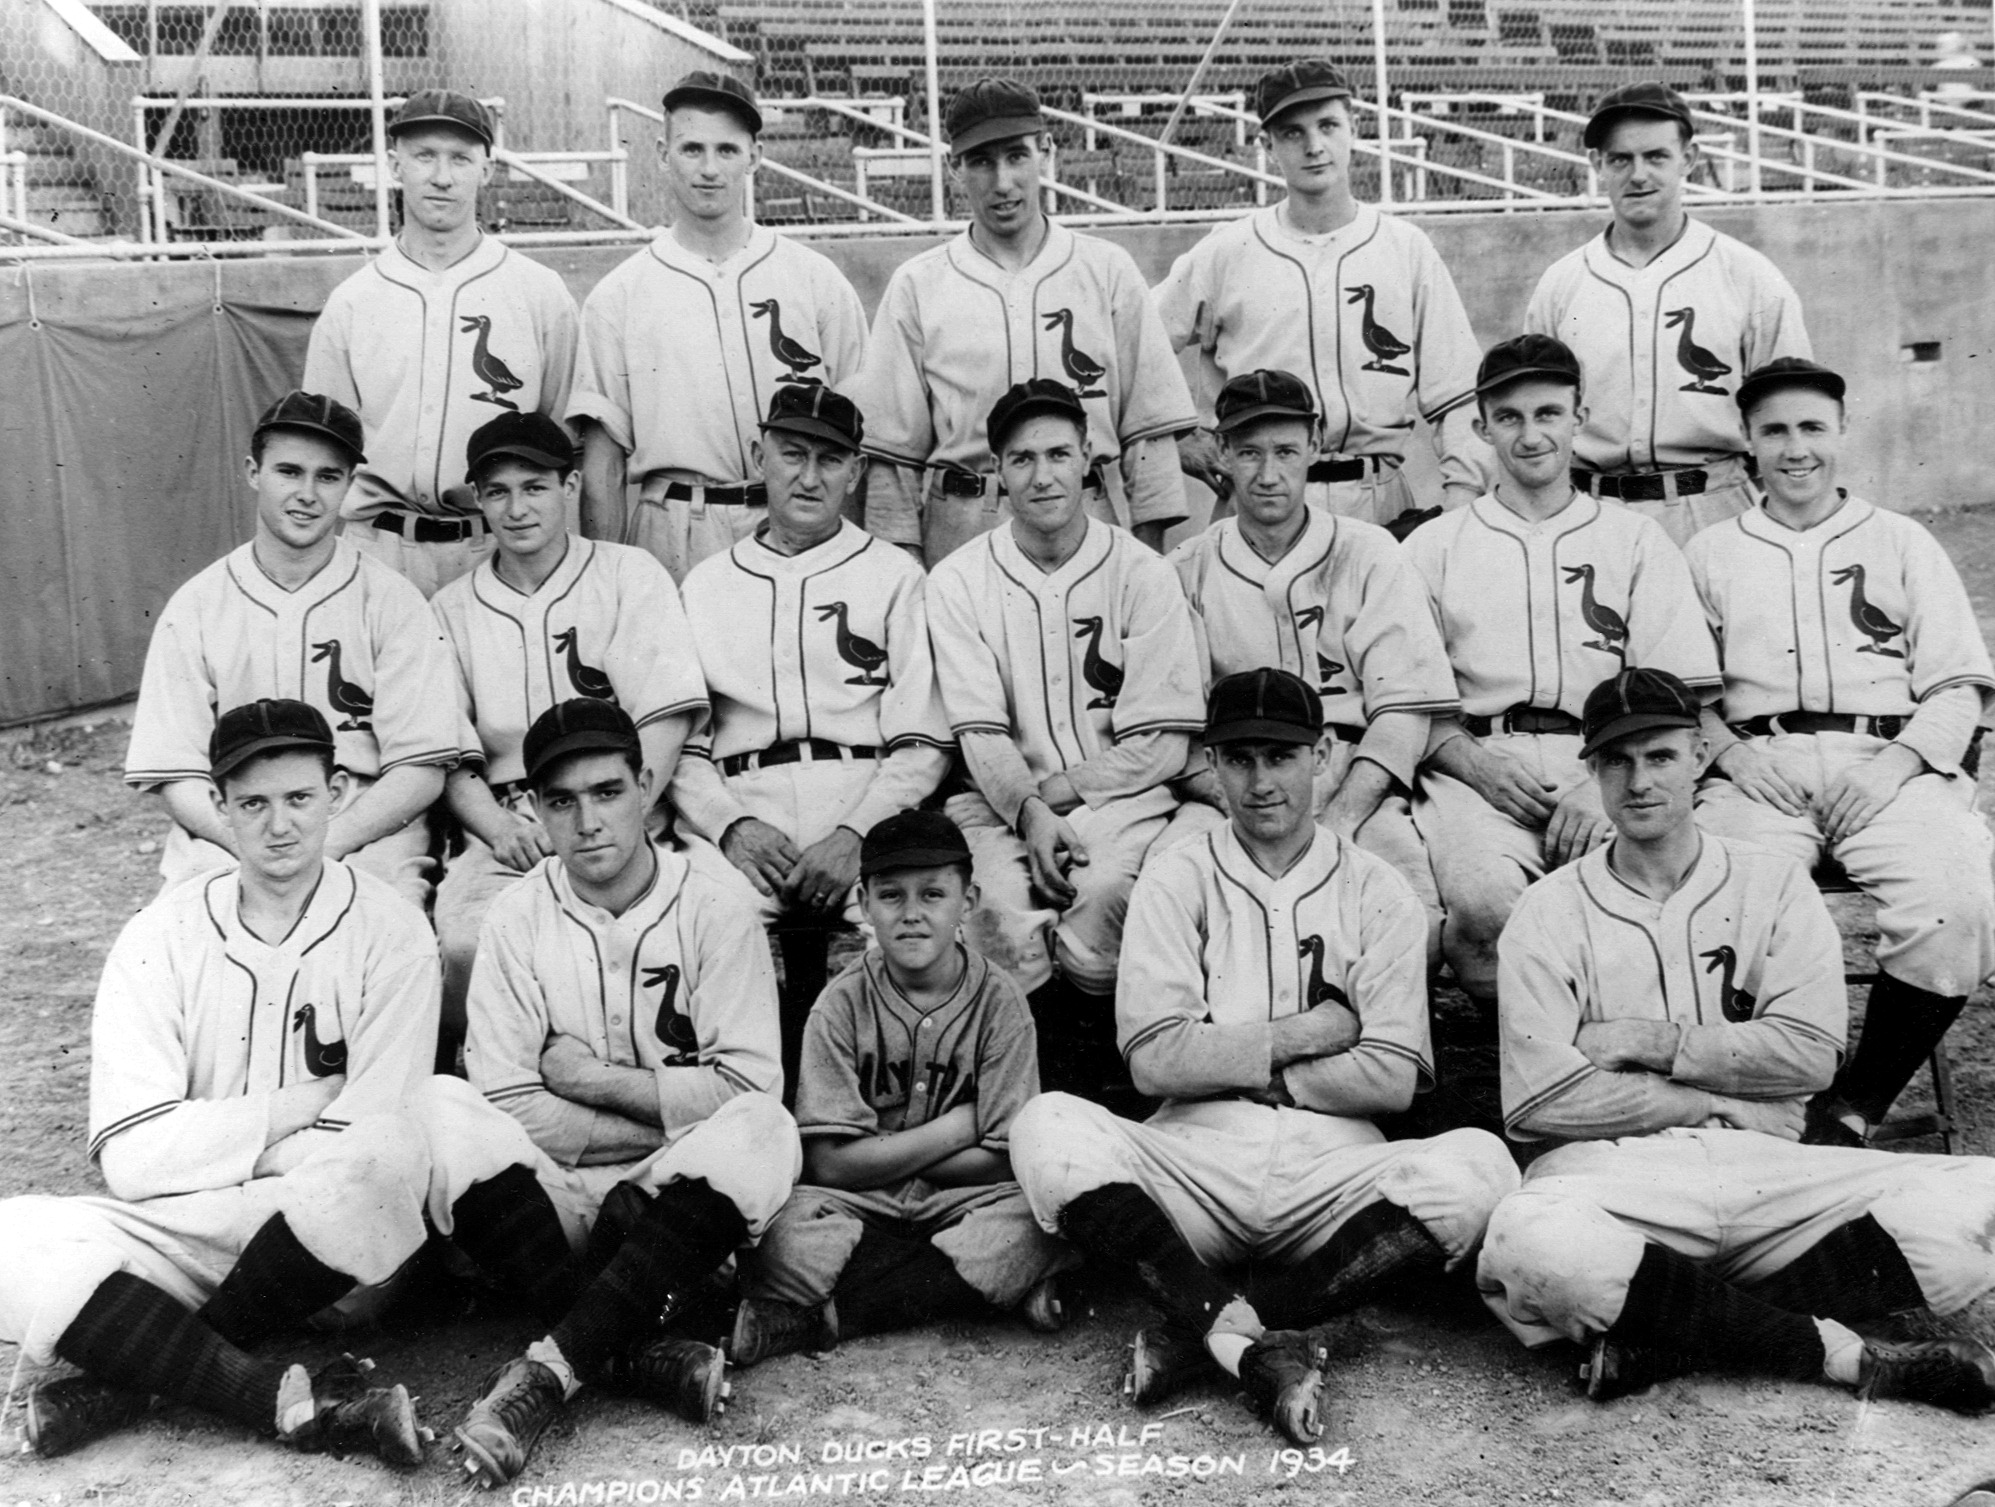 Baseball's history in Dayton: From the 'Gem Citys' of 1884 to the Dragons  of today